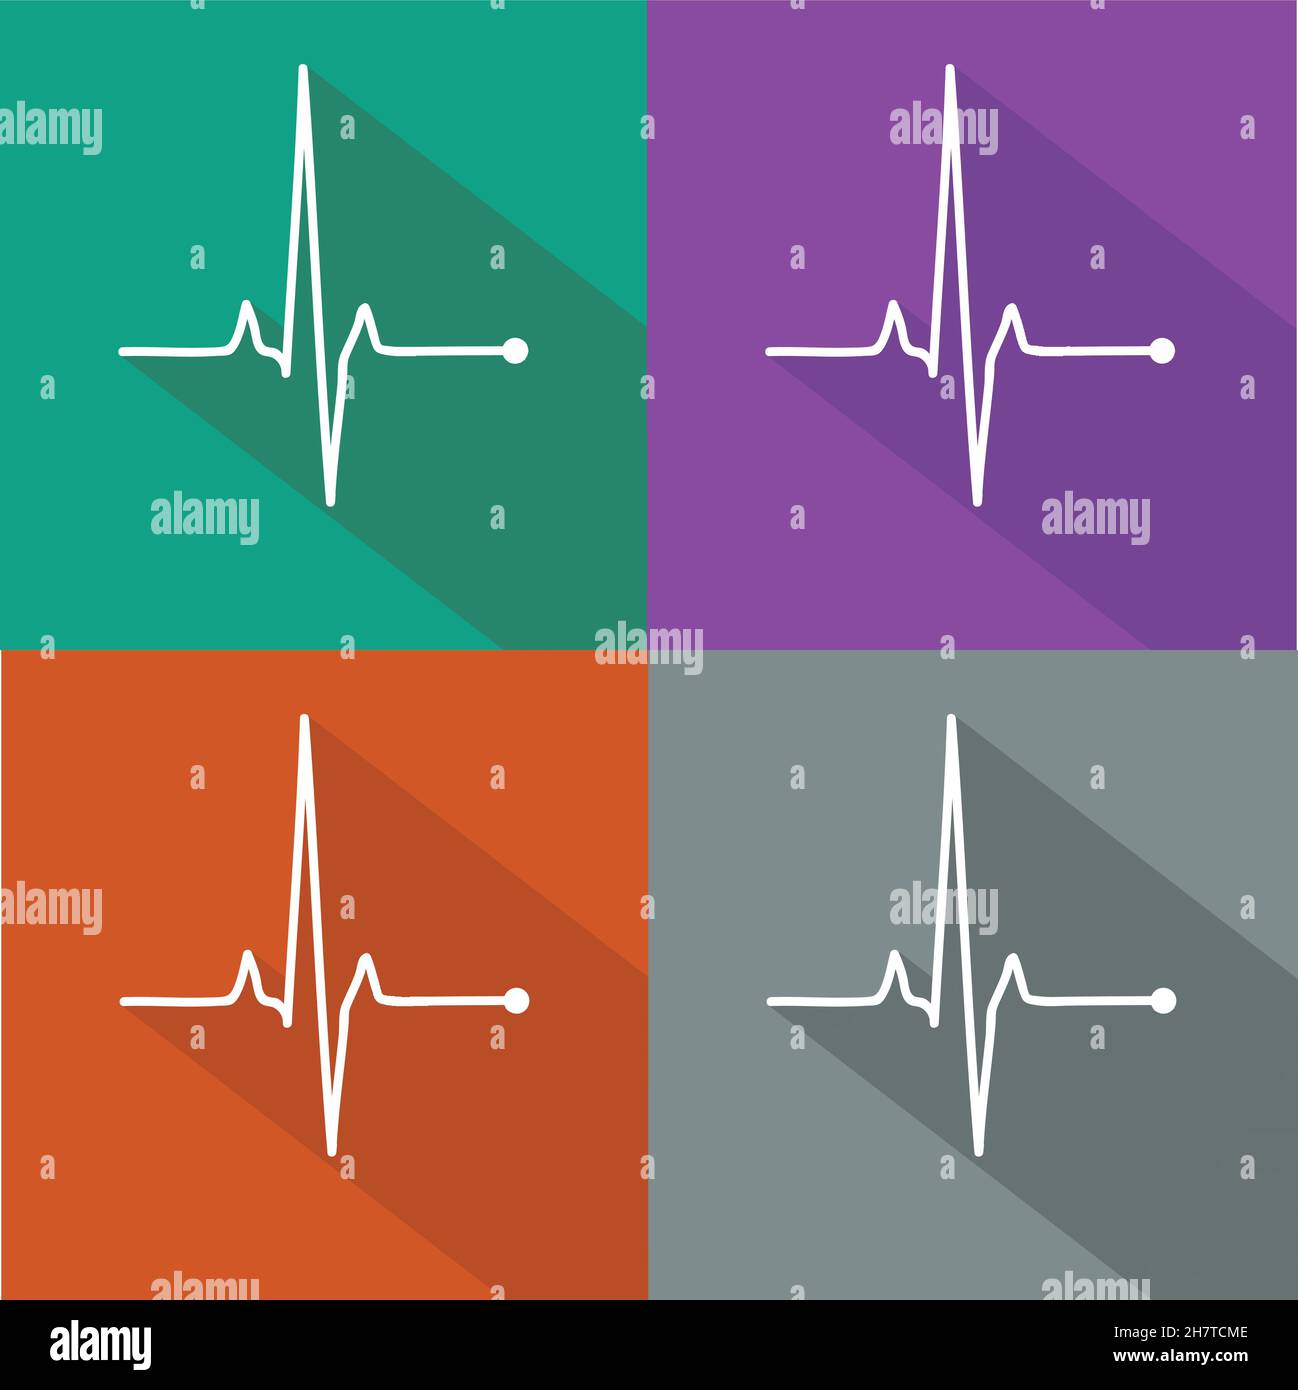 Vector pulse icons set, cardiogram signs, heartbeat icon collection isolated over colored boxes Stock Vector